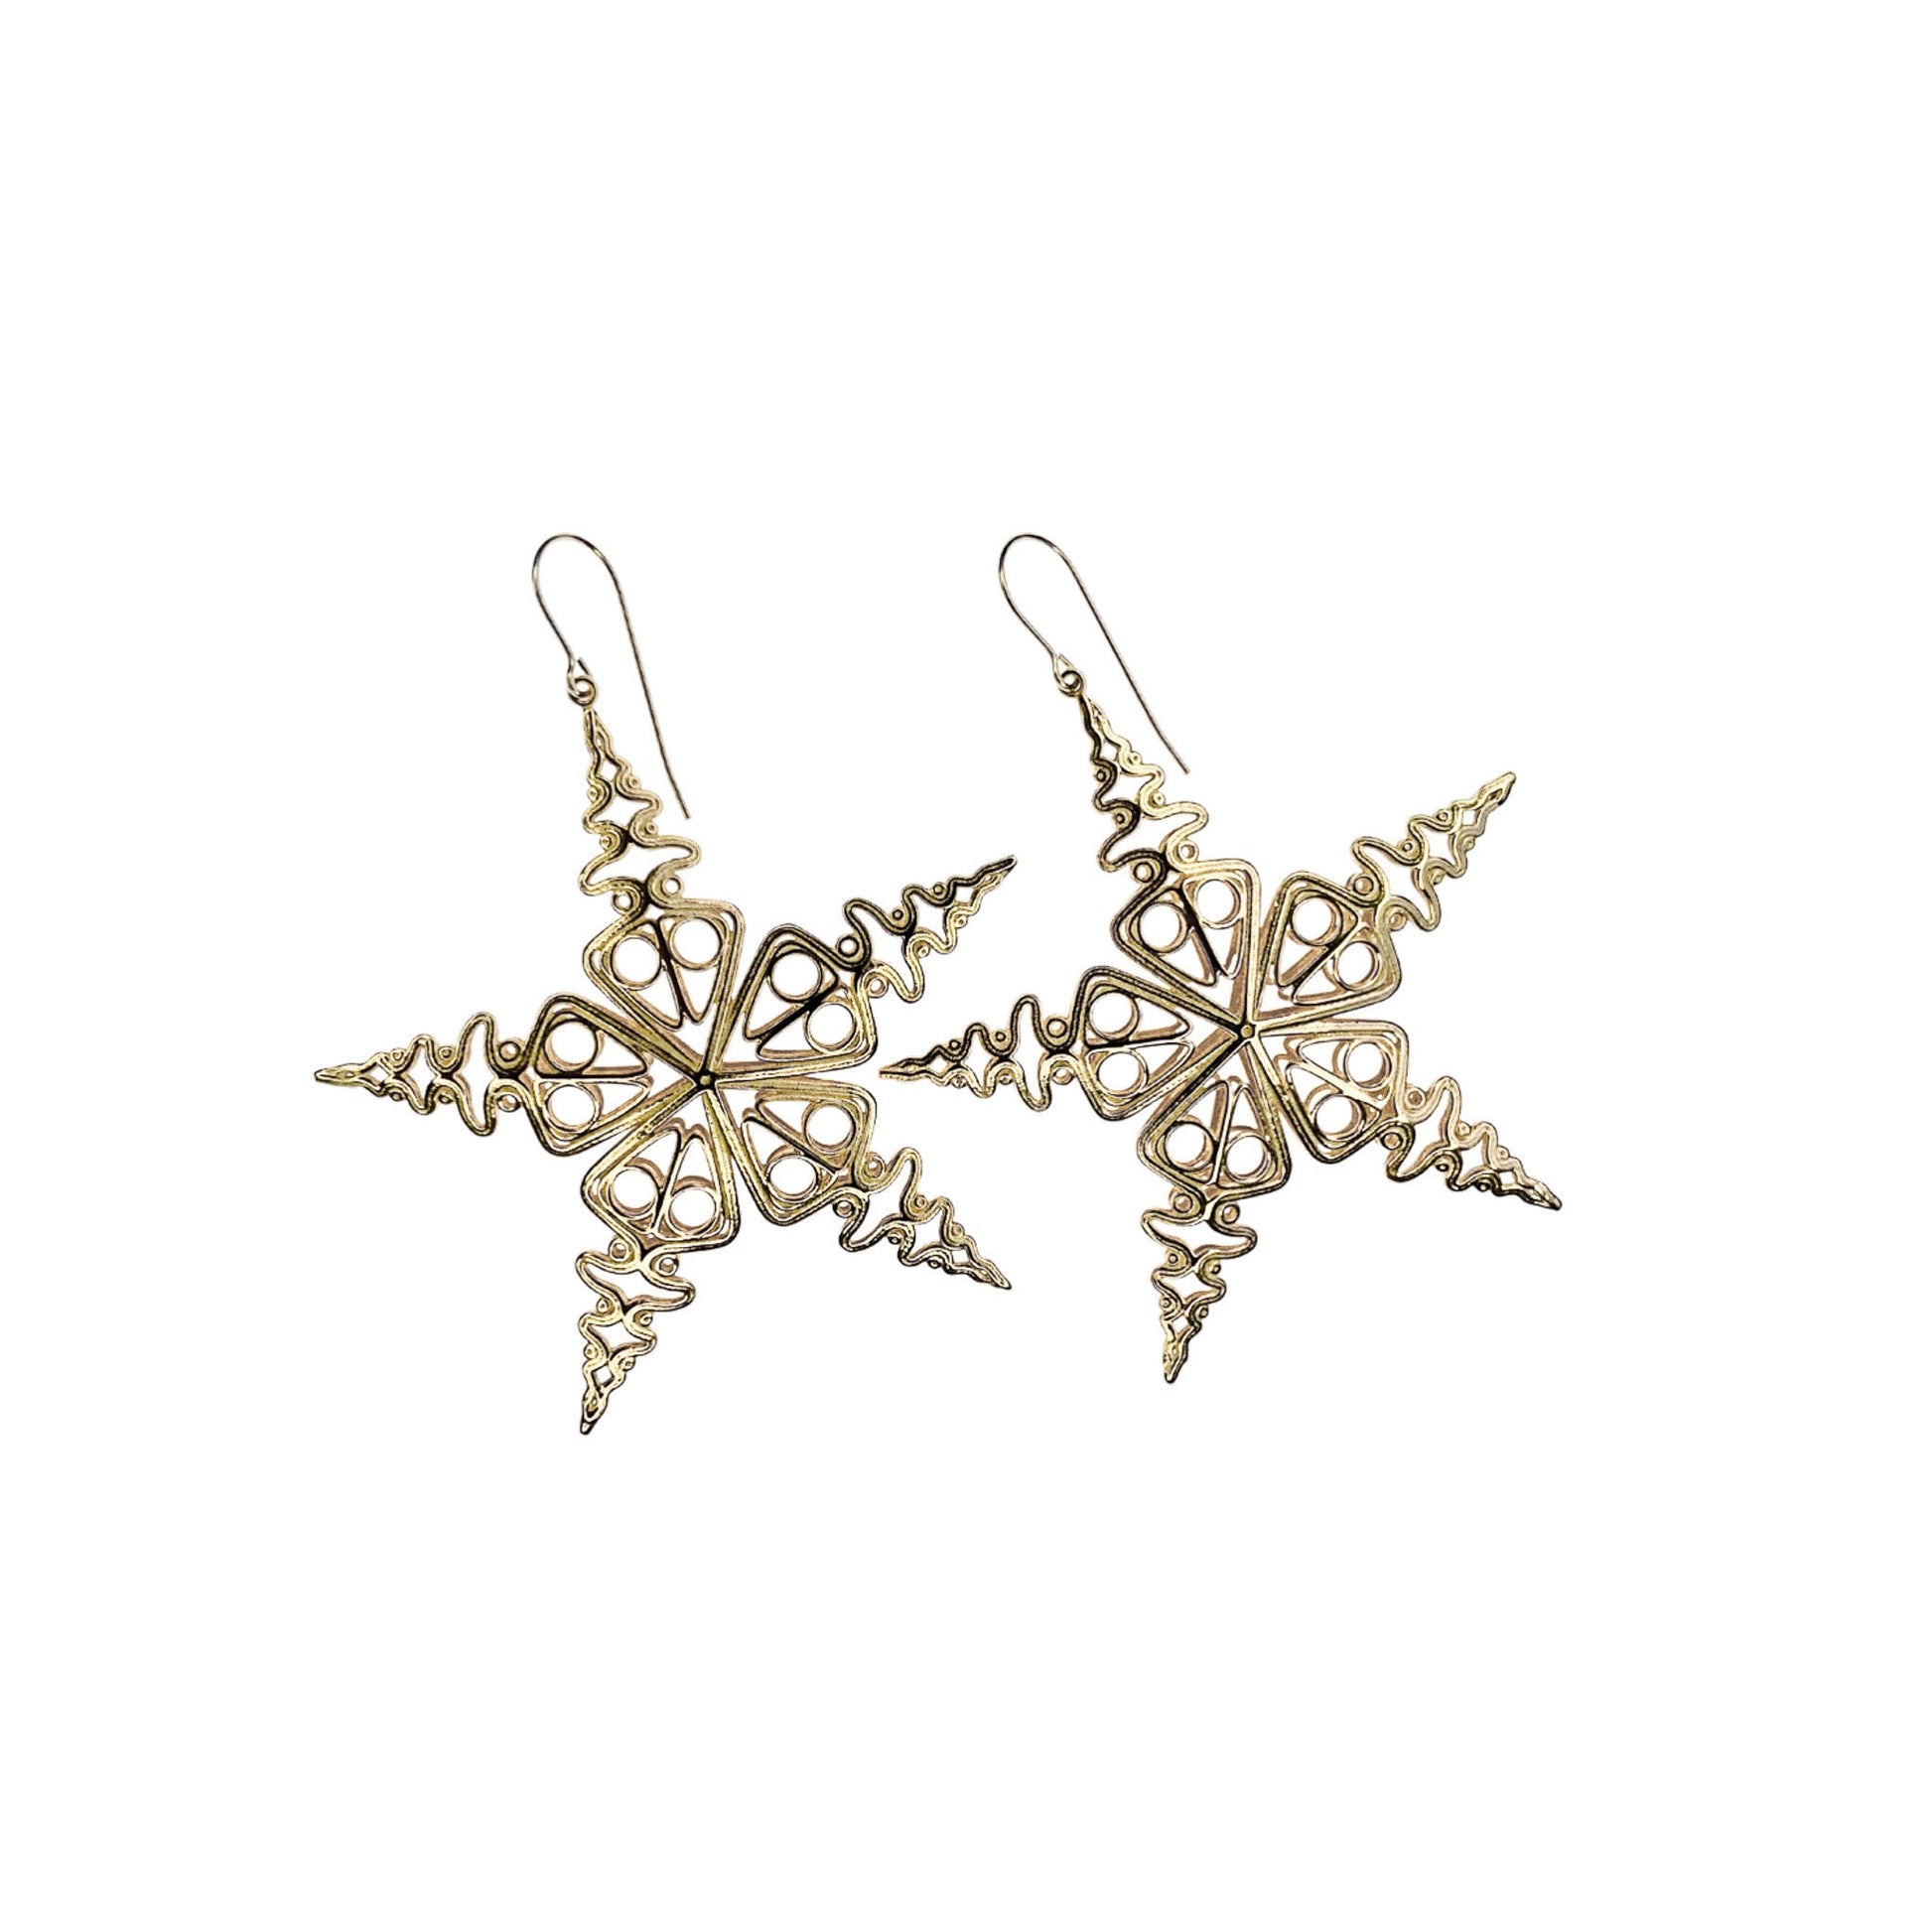 Celestial Star Earrings in Solid Silver, 14K Gold Plate, or Solid Gold